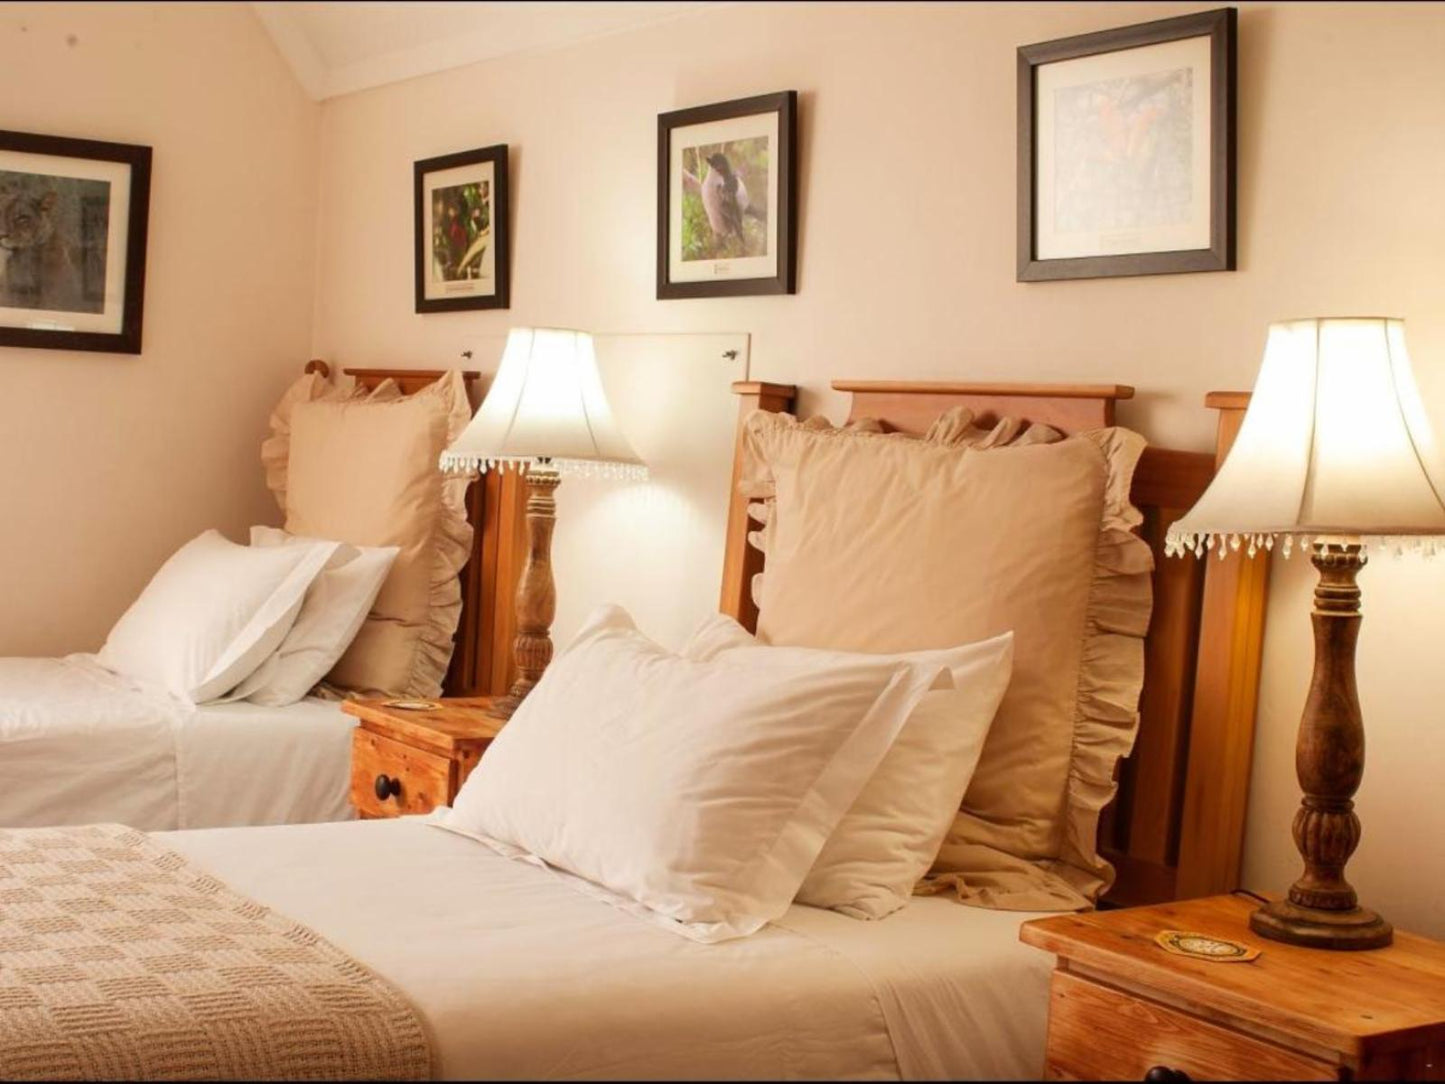 Self-catering Double Room With Twin Beds @ York House B & B